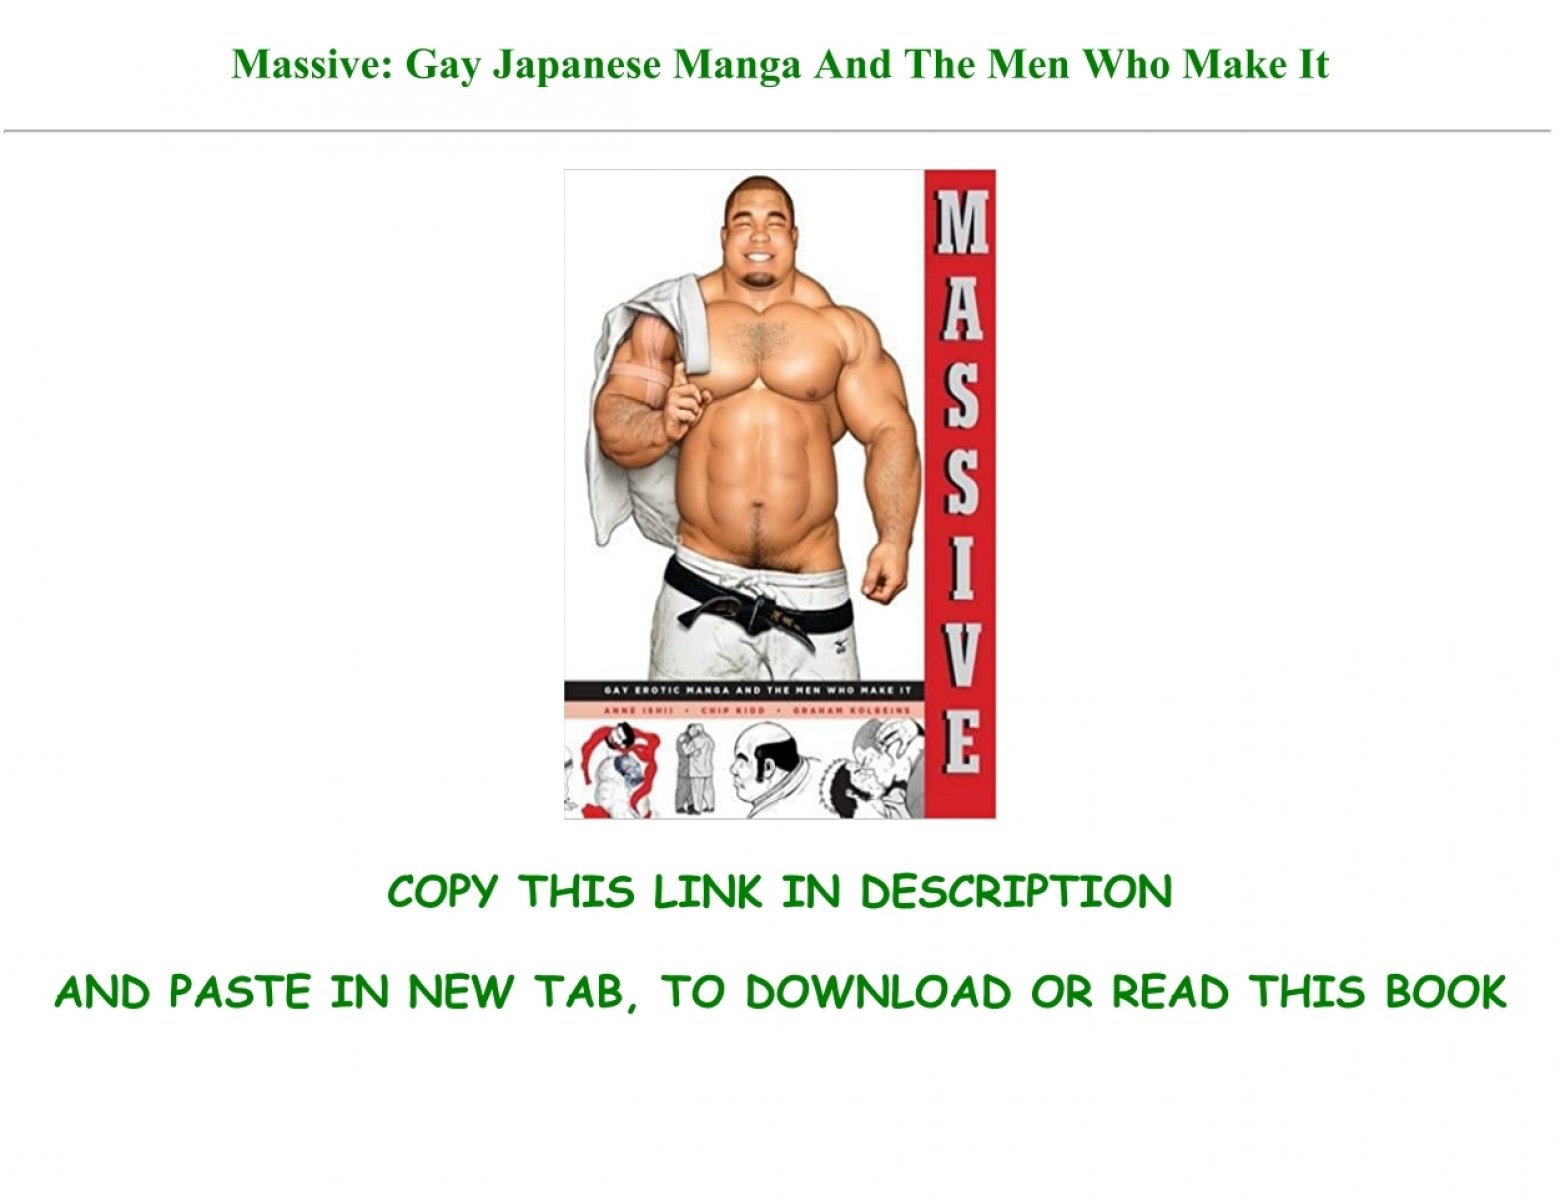 Free Download Massive Gay Japanese Manga And The Men Who Make It For Any Device